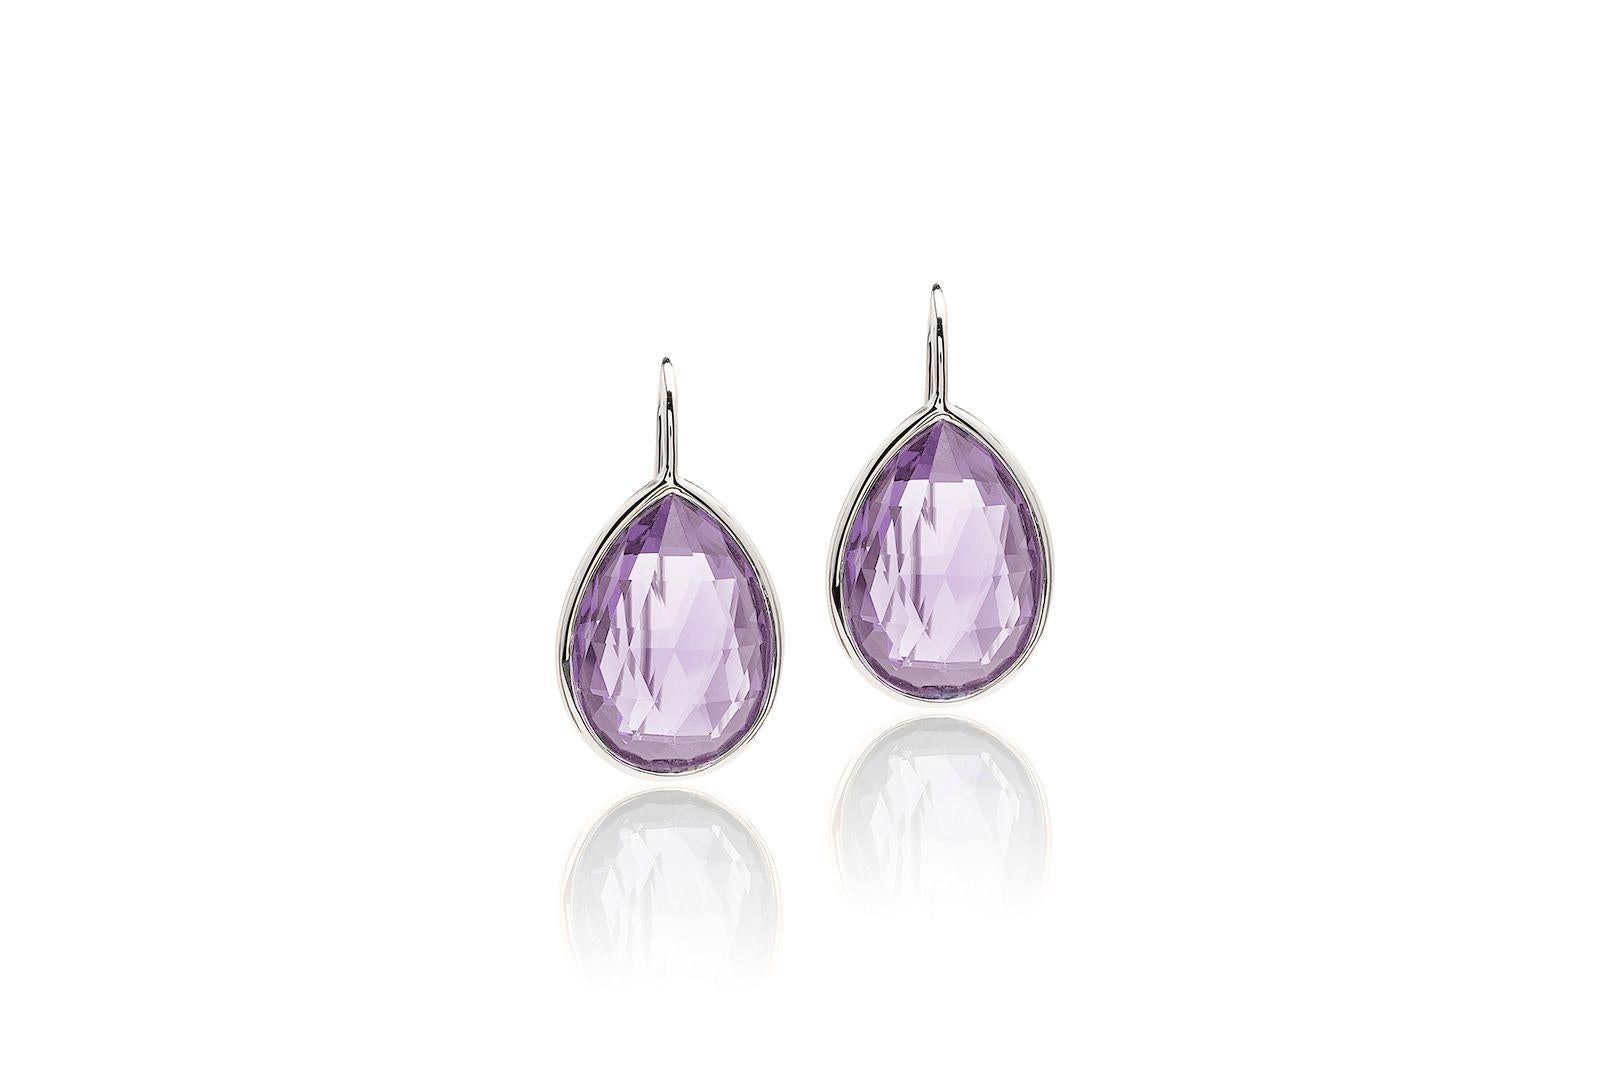 Lavender Amethyst Pear Shape Briolette Earrings on Wire in 18K White Gold, from 'Gossip' Collection

Stone Size: 10 x 14 mm 

Gemstone Approx Wt: Lavender Amethyst - 10.77 Carats 